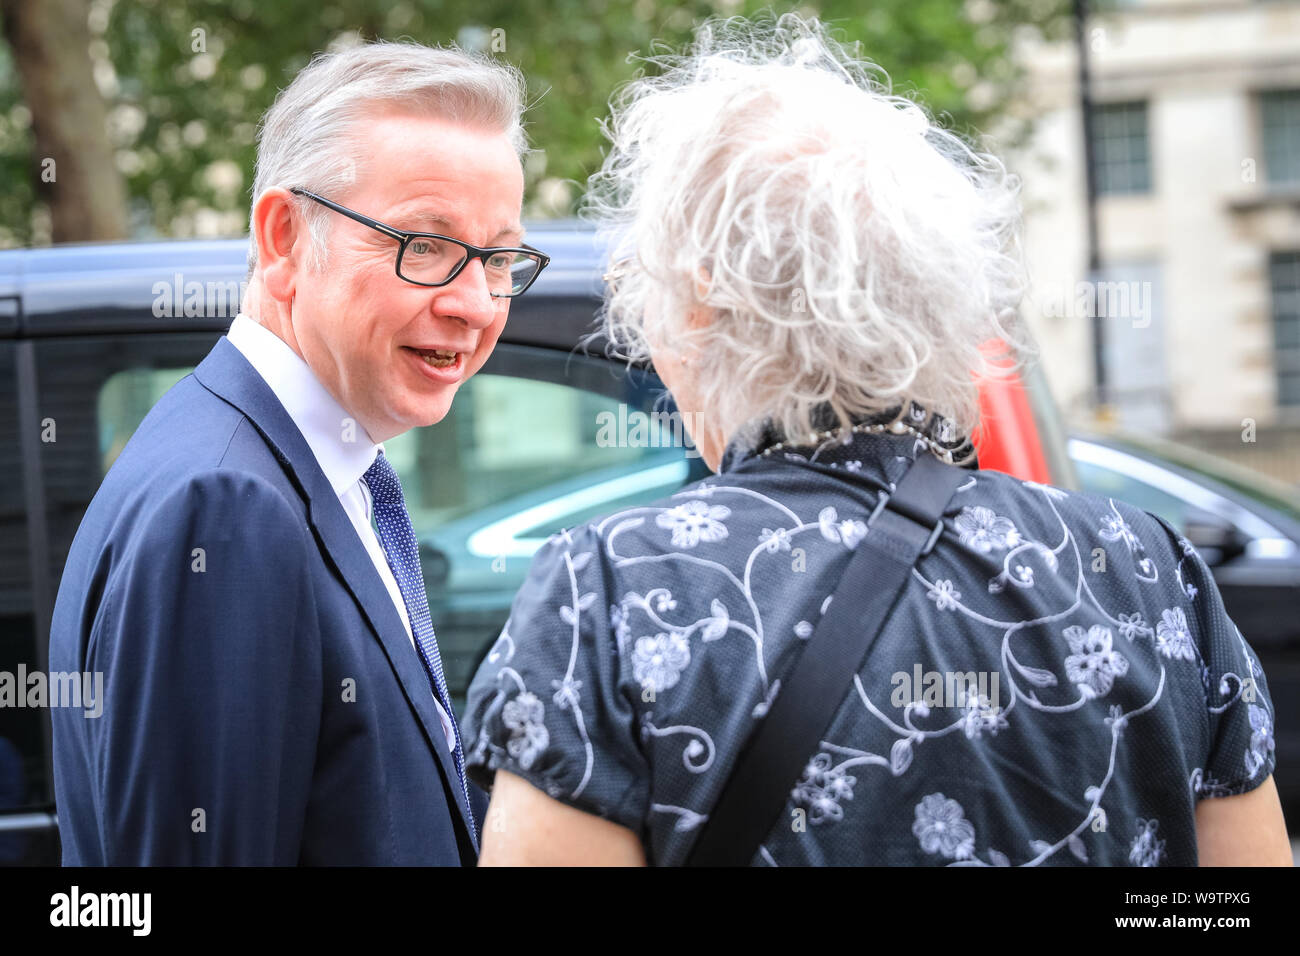 London, UK. 15th Aug, 2019.  Michael Gove, Chancellor of the Duchy of Lancaster with responsibility for no-deal Brexit preparations, as well as overseeing constitutional affairs, maintaining the integrity of the Union and having oversight over all Cabinet Office policy, exits the Cabinet Office in Whitehall and chats to a woman. Credit: Imageplotter/Alamy Live News Stock Photo